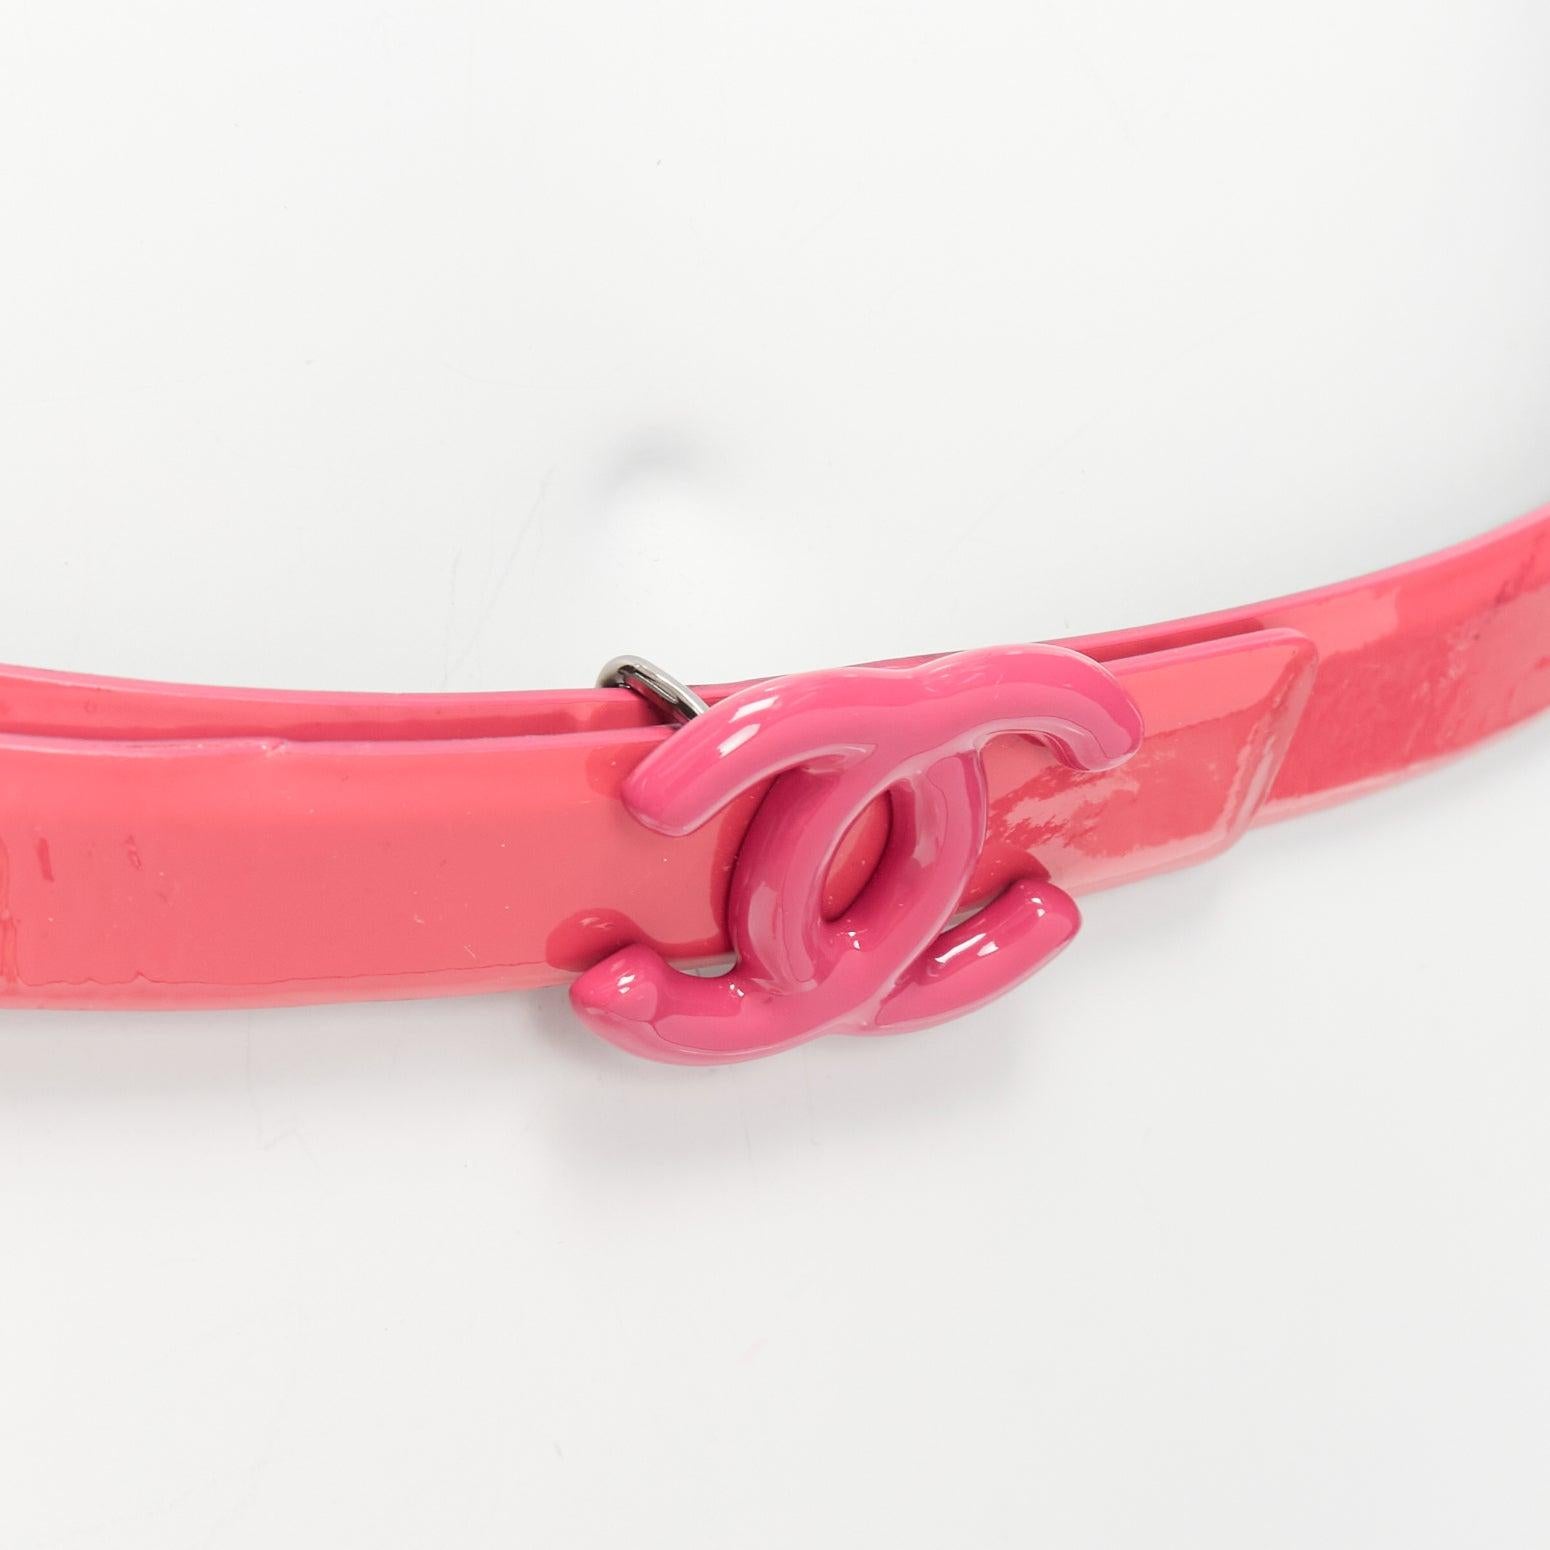 CHANEL B15P hot pink patent leather CC logo buckle skinny belt 70cm
Reference: AAWC/A01194
Brand: Chanel
Collection: B15P
Material: Patent Leather
Color: Pink
Pattern: Solid
Closure: Belt
Lining: Black Leather
Made in: Italy

CONDITION:
Condition: